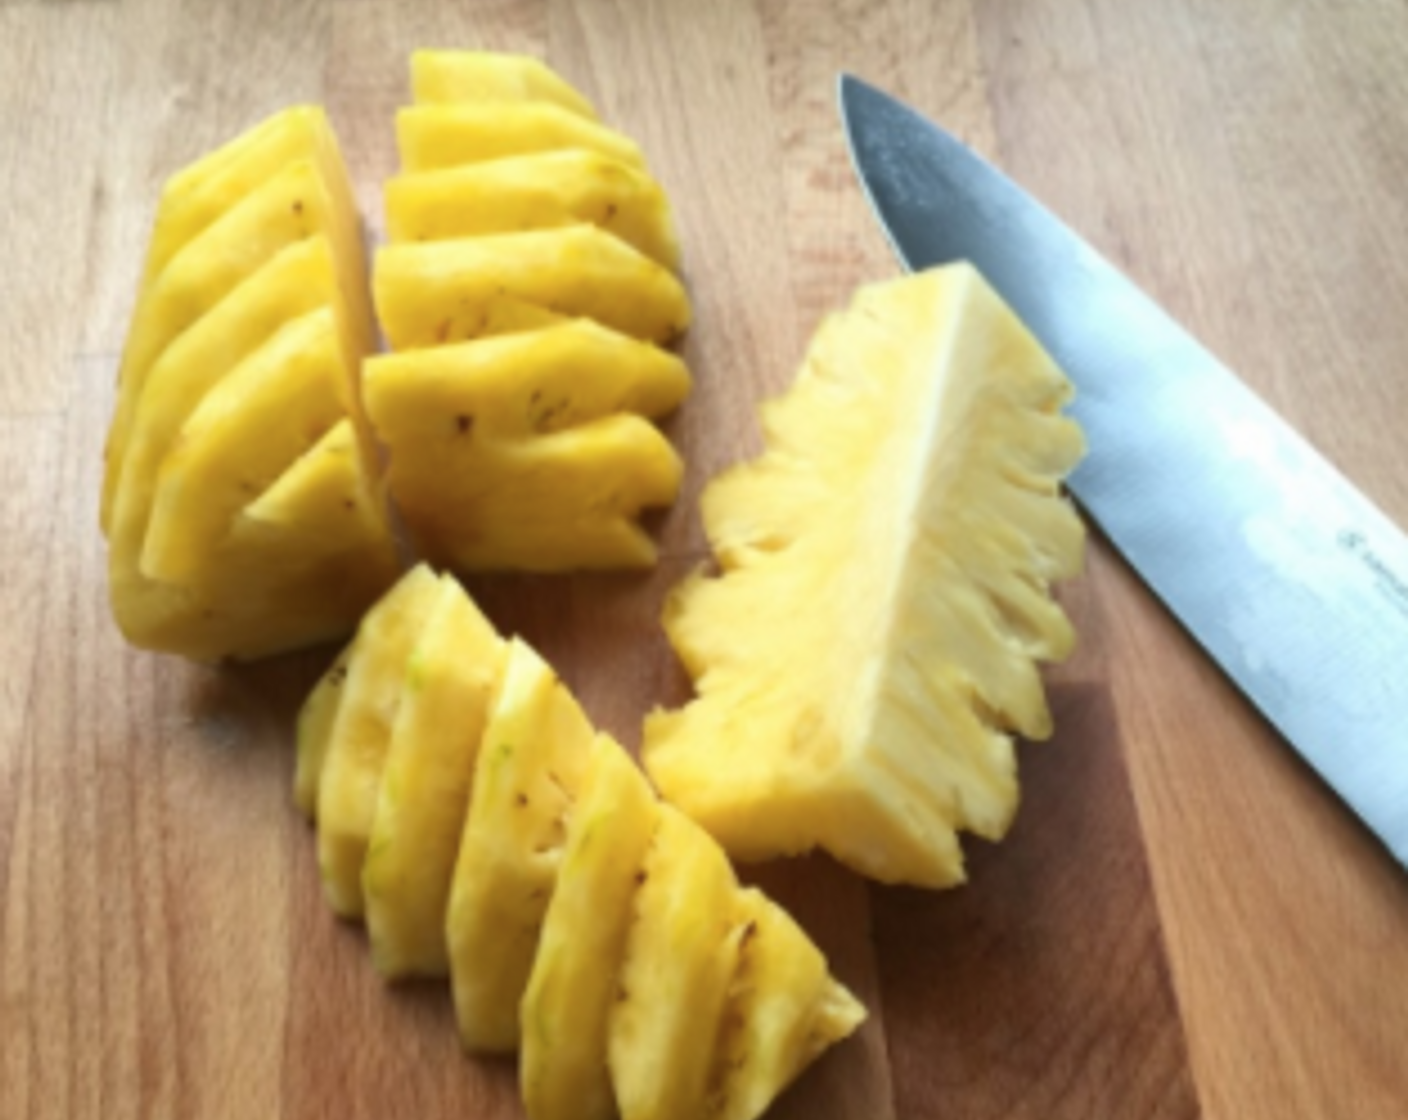 step 8 Next, slice the pineapple into long quarters. And we're ready to grate the sliced pineapples!